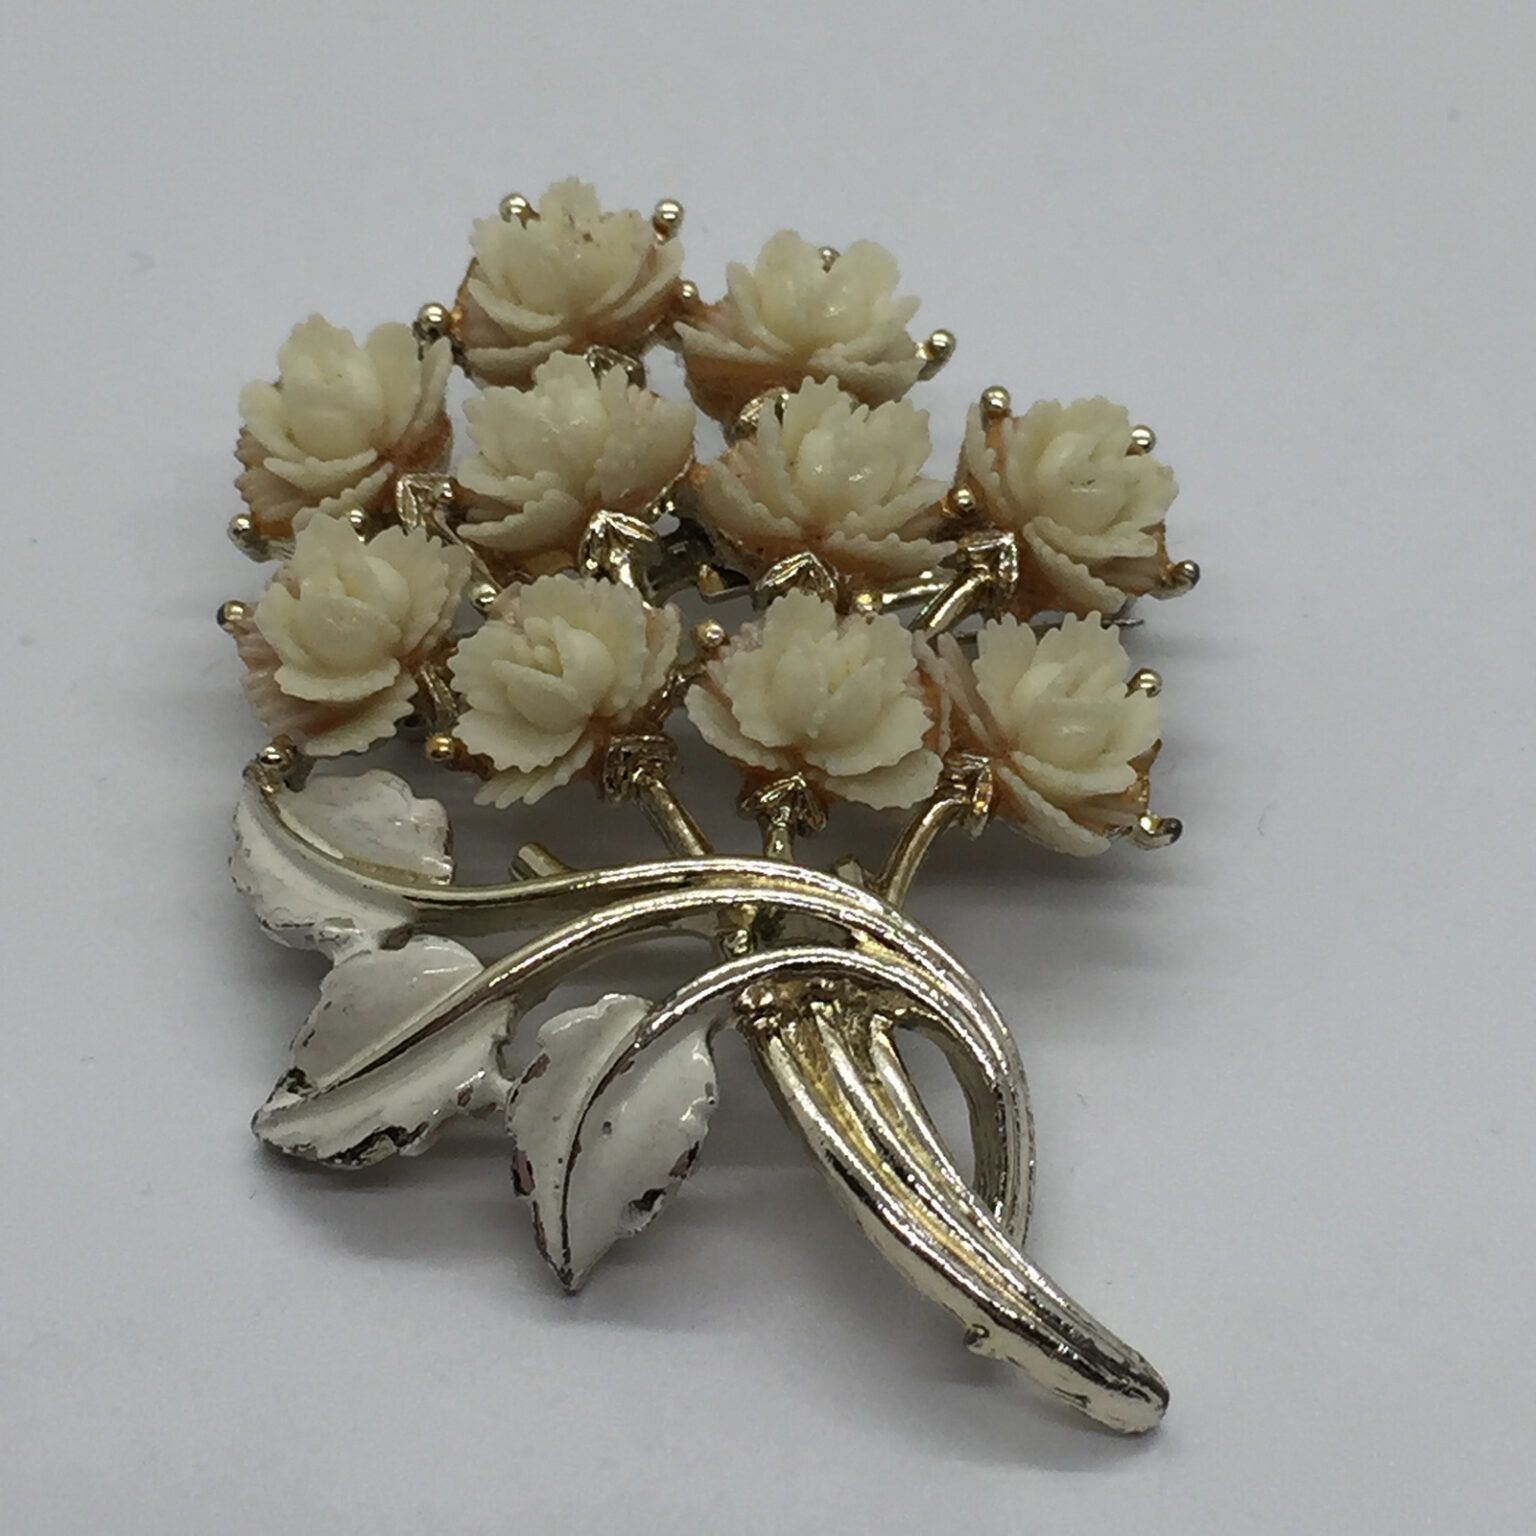 Floral Bouquet Brooch with Molded Flowers by JJ